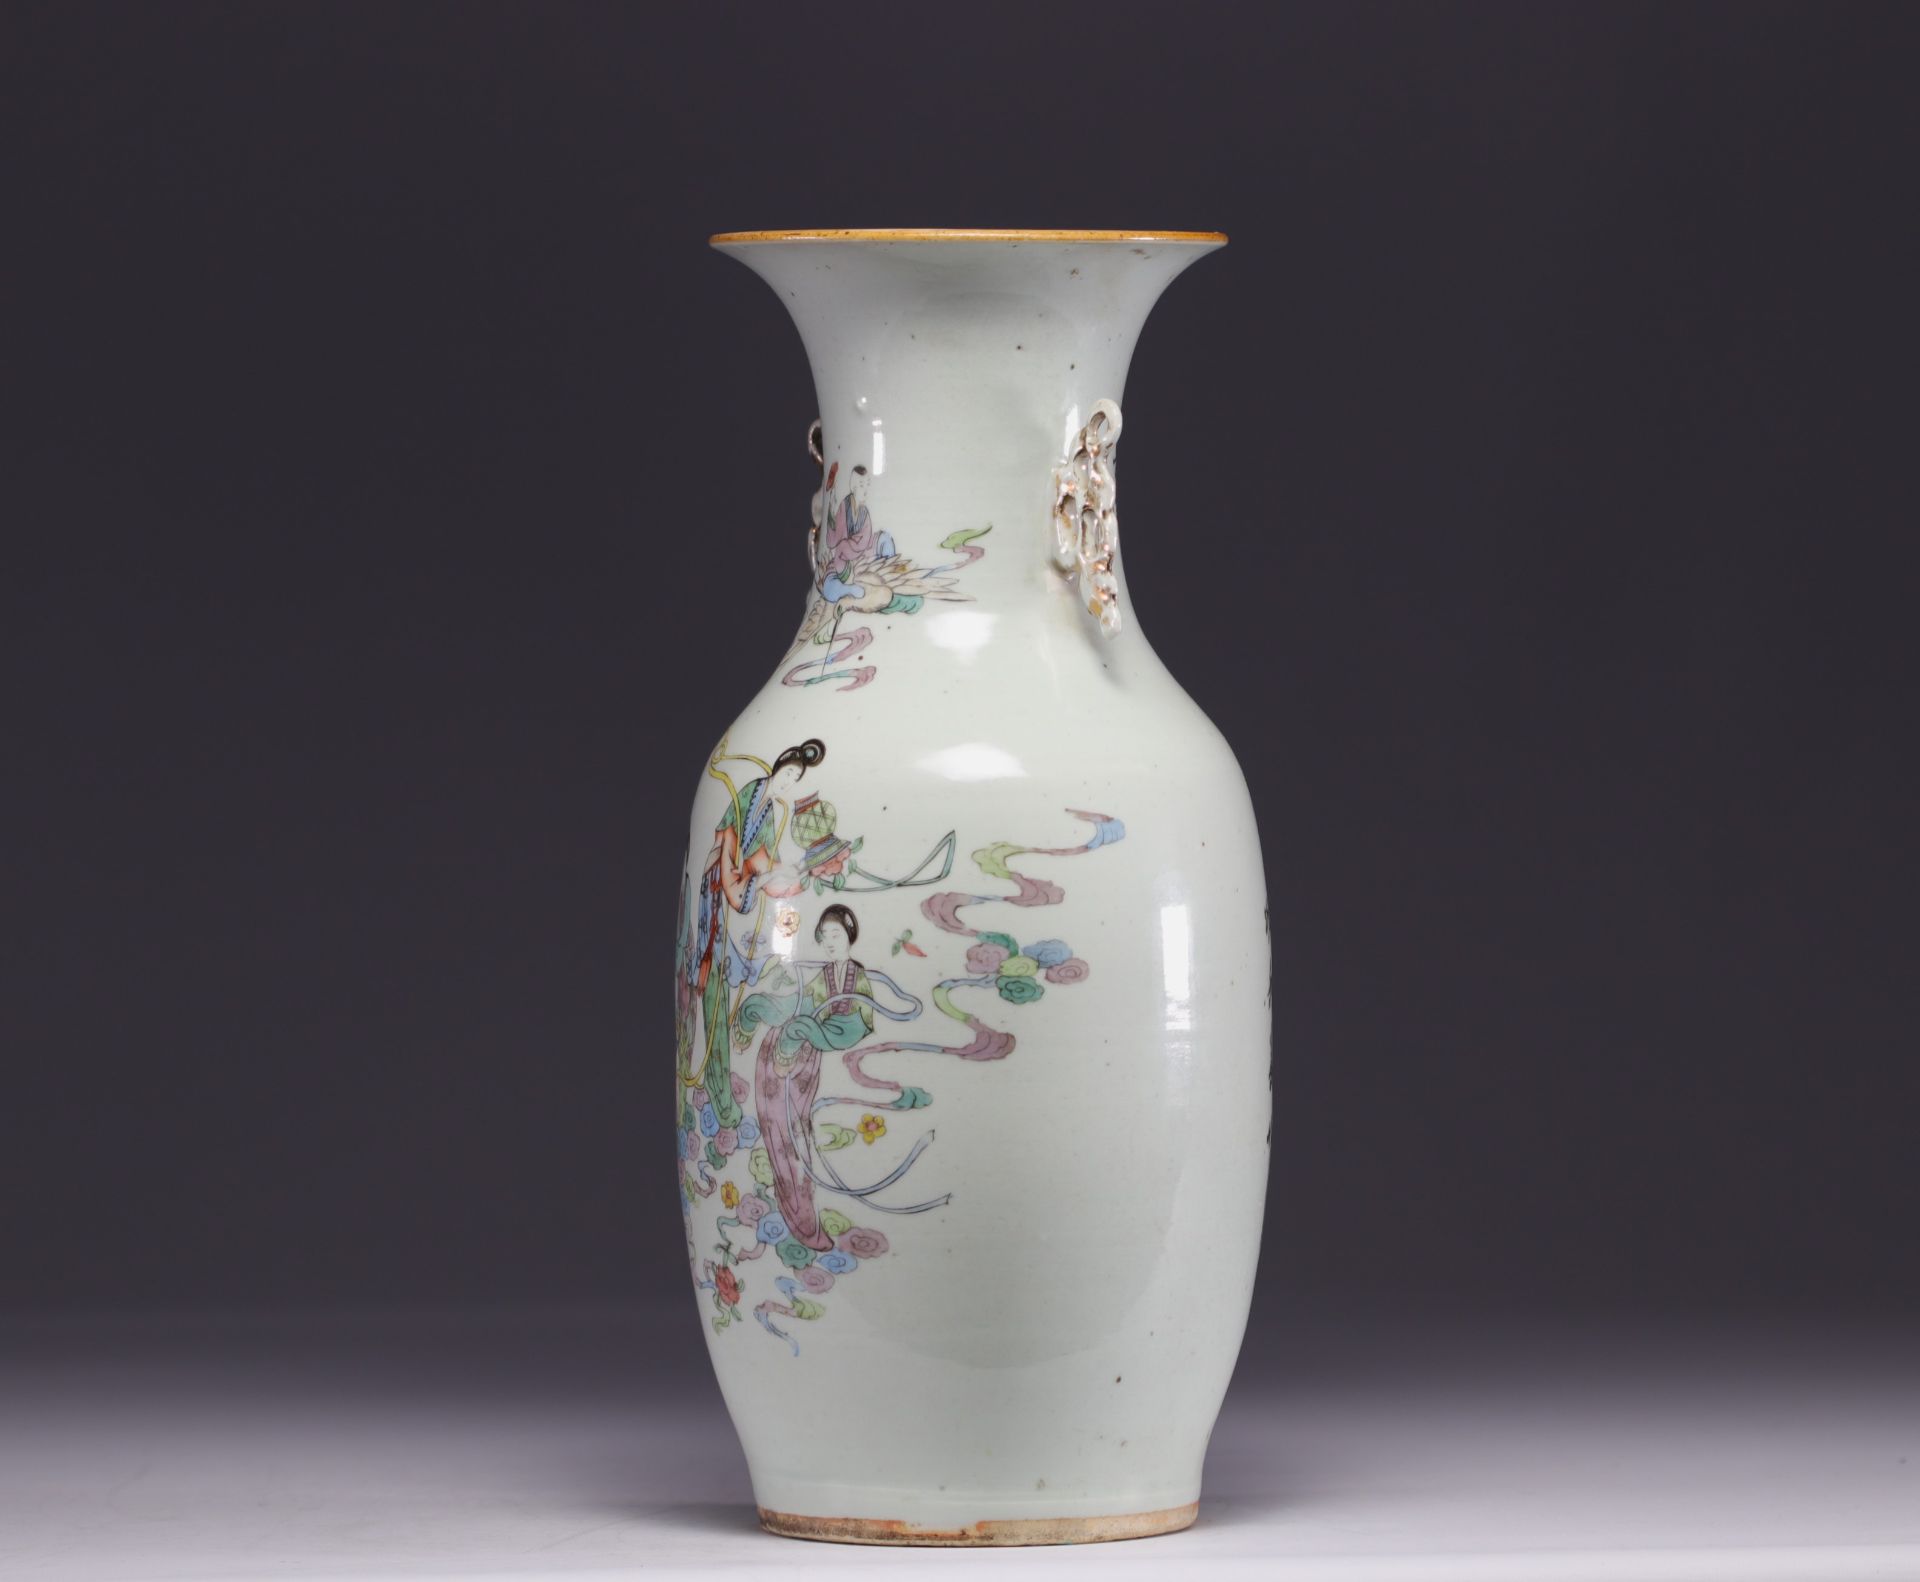 China - Famille rose vase decorated with figures, early 20th century - Image 4 of 5